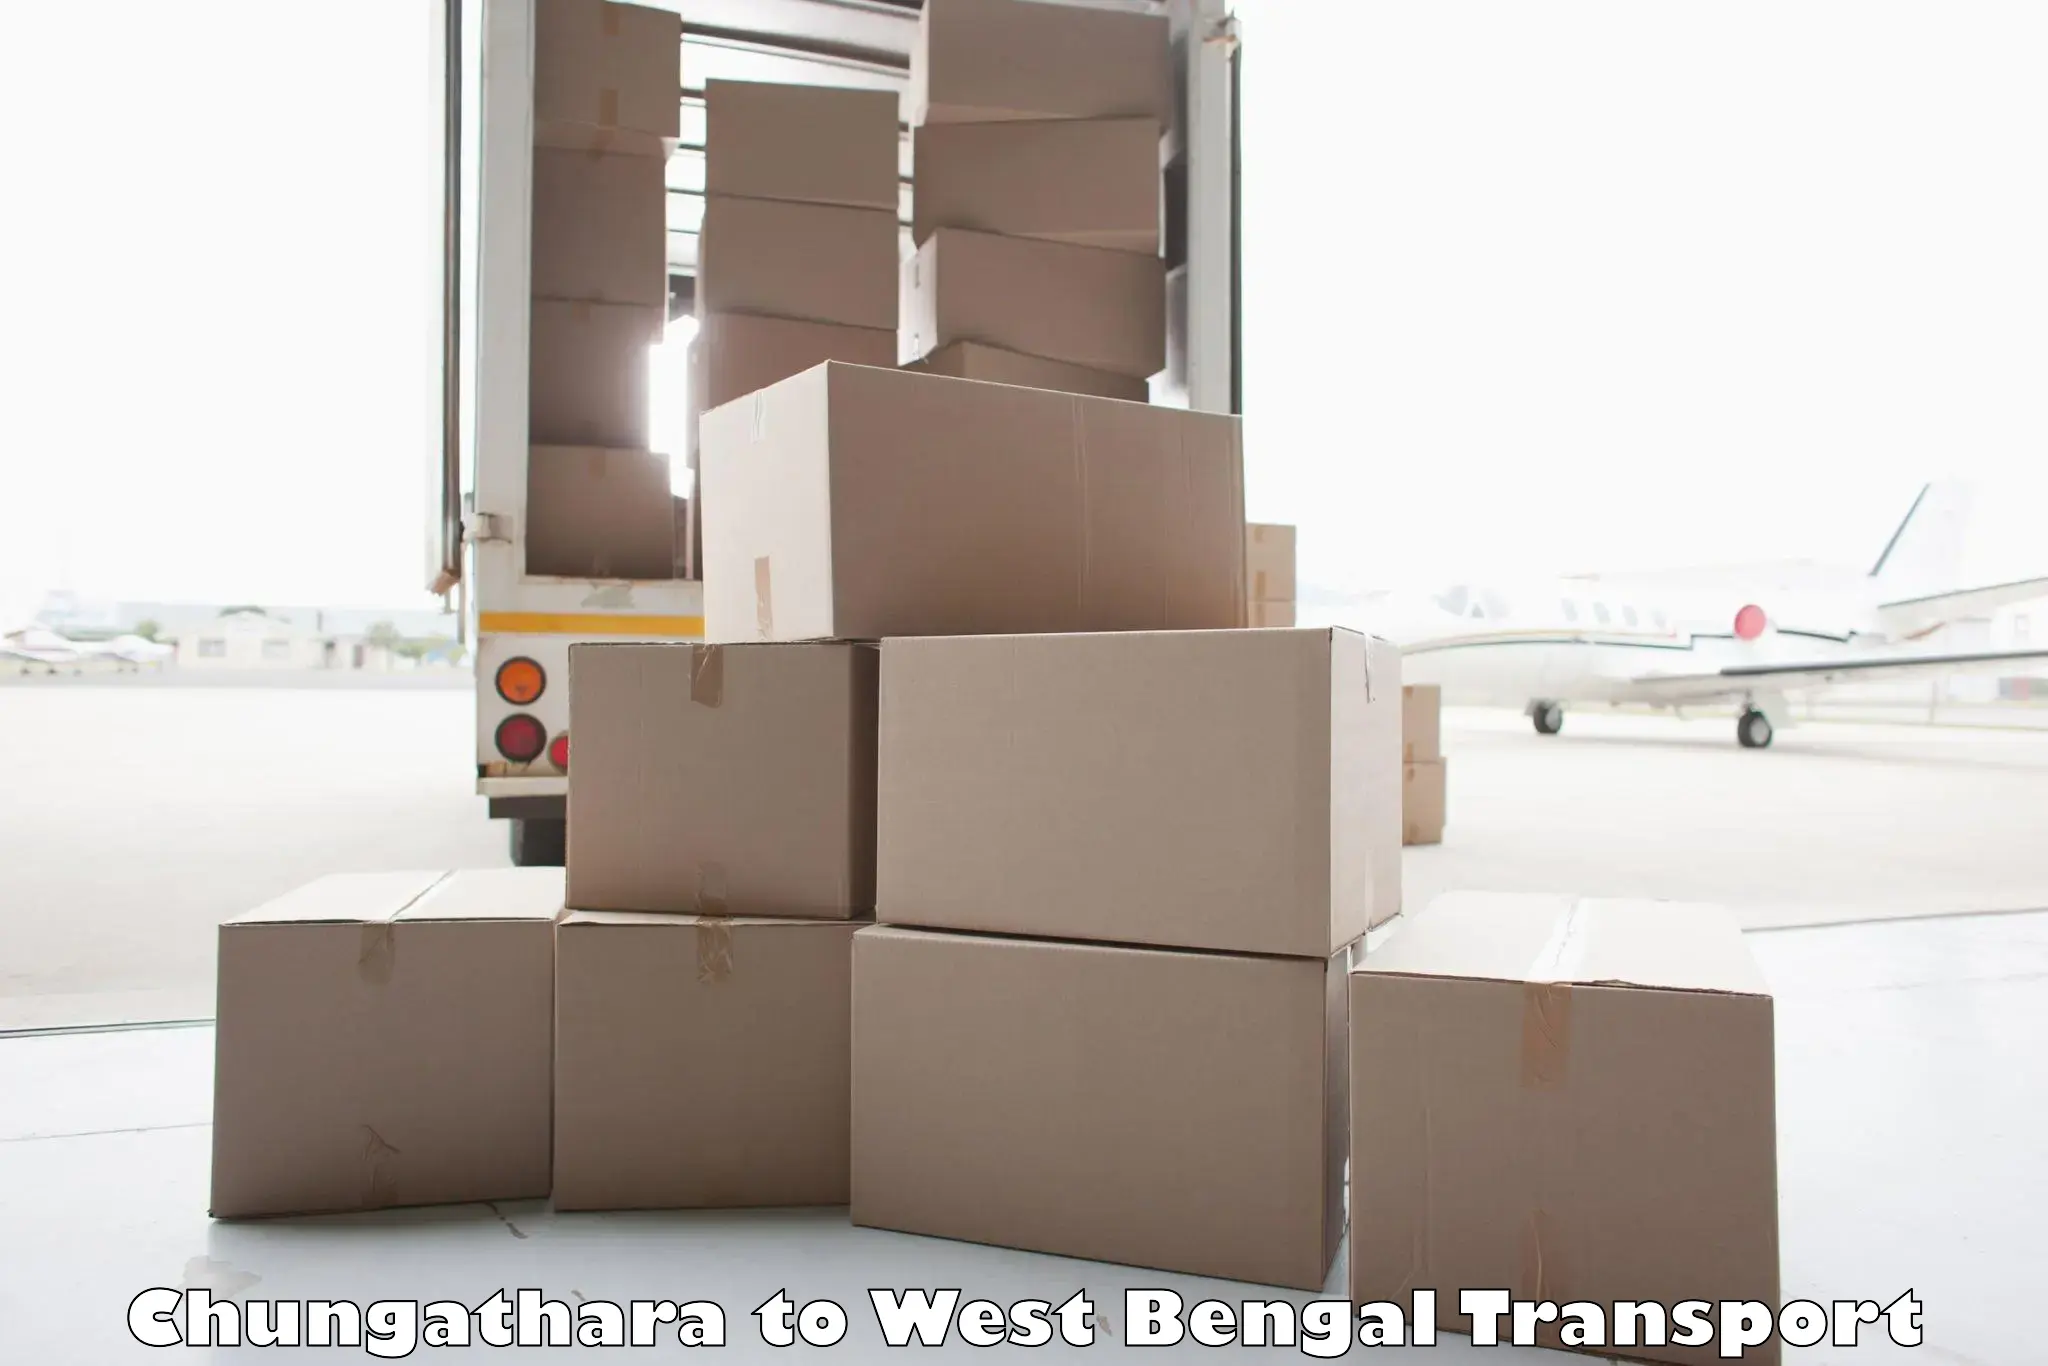 Package delivery services Chungathara to Kandi